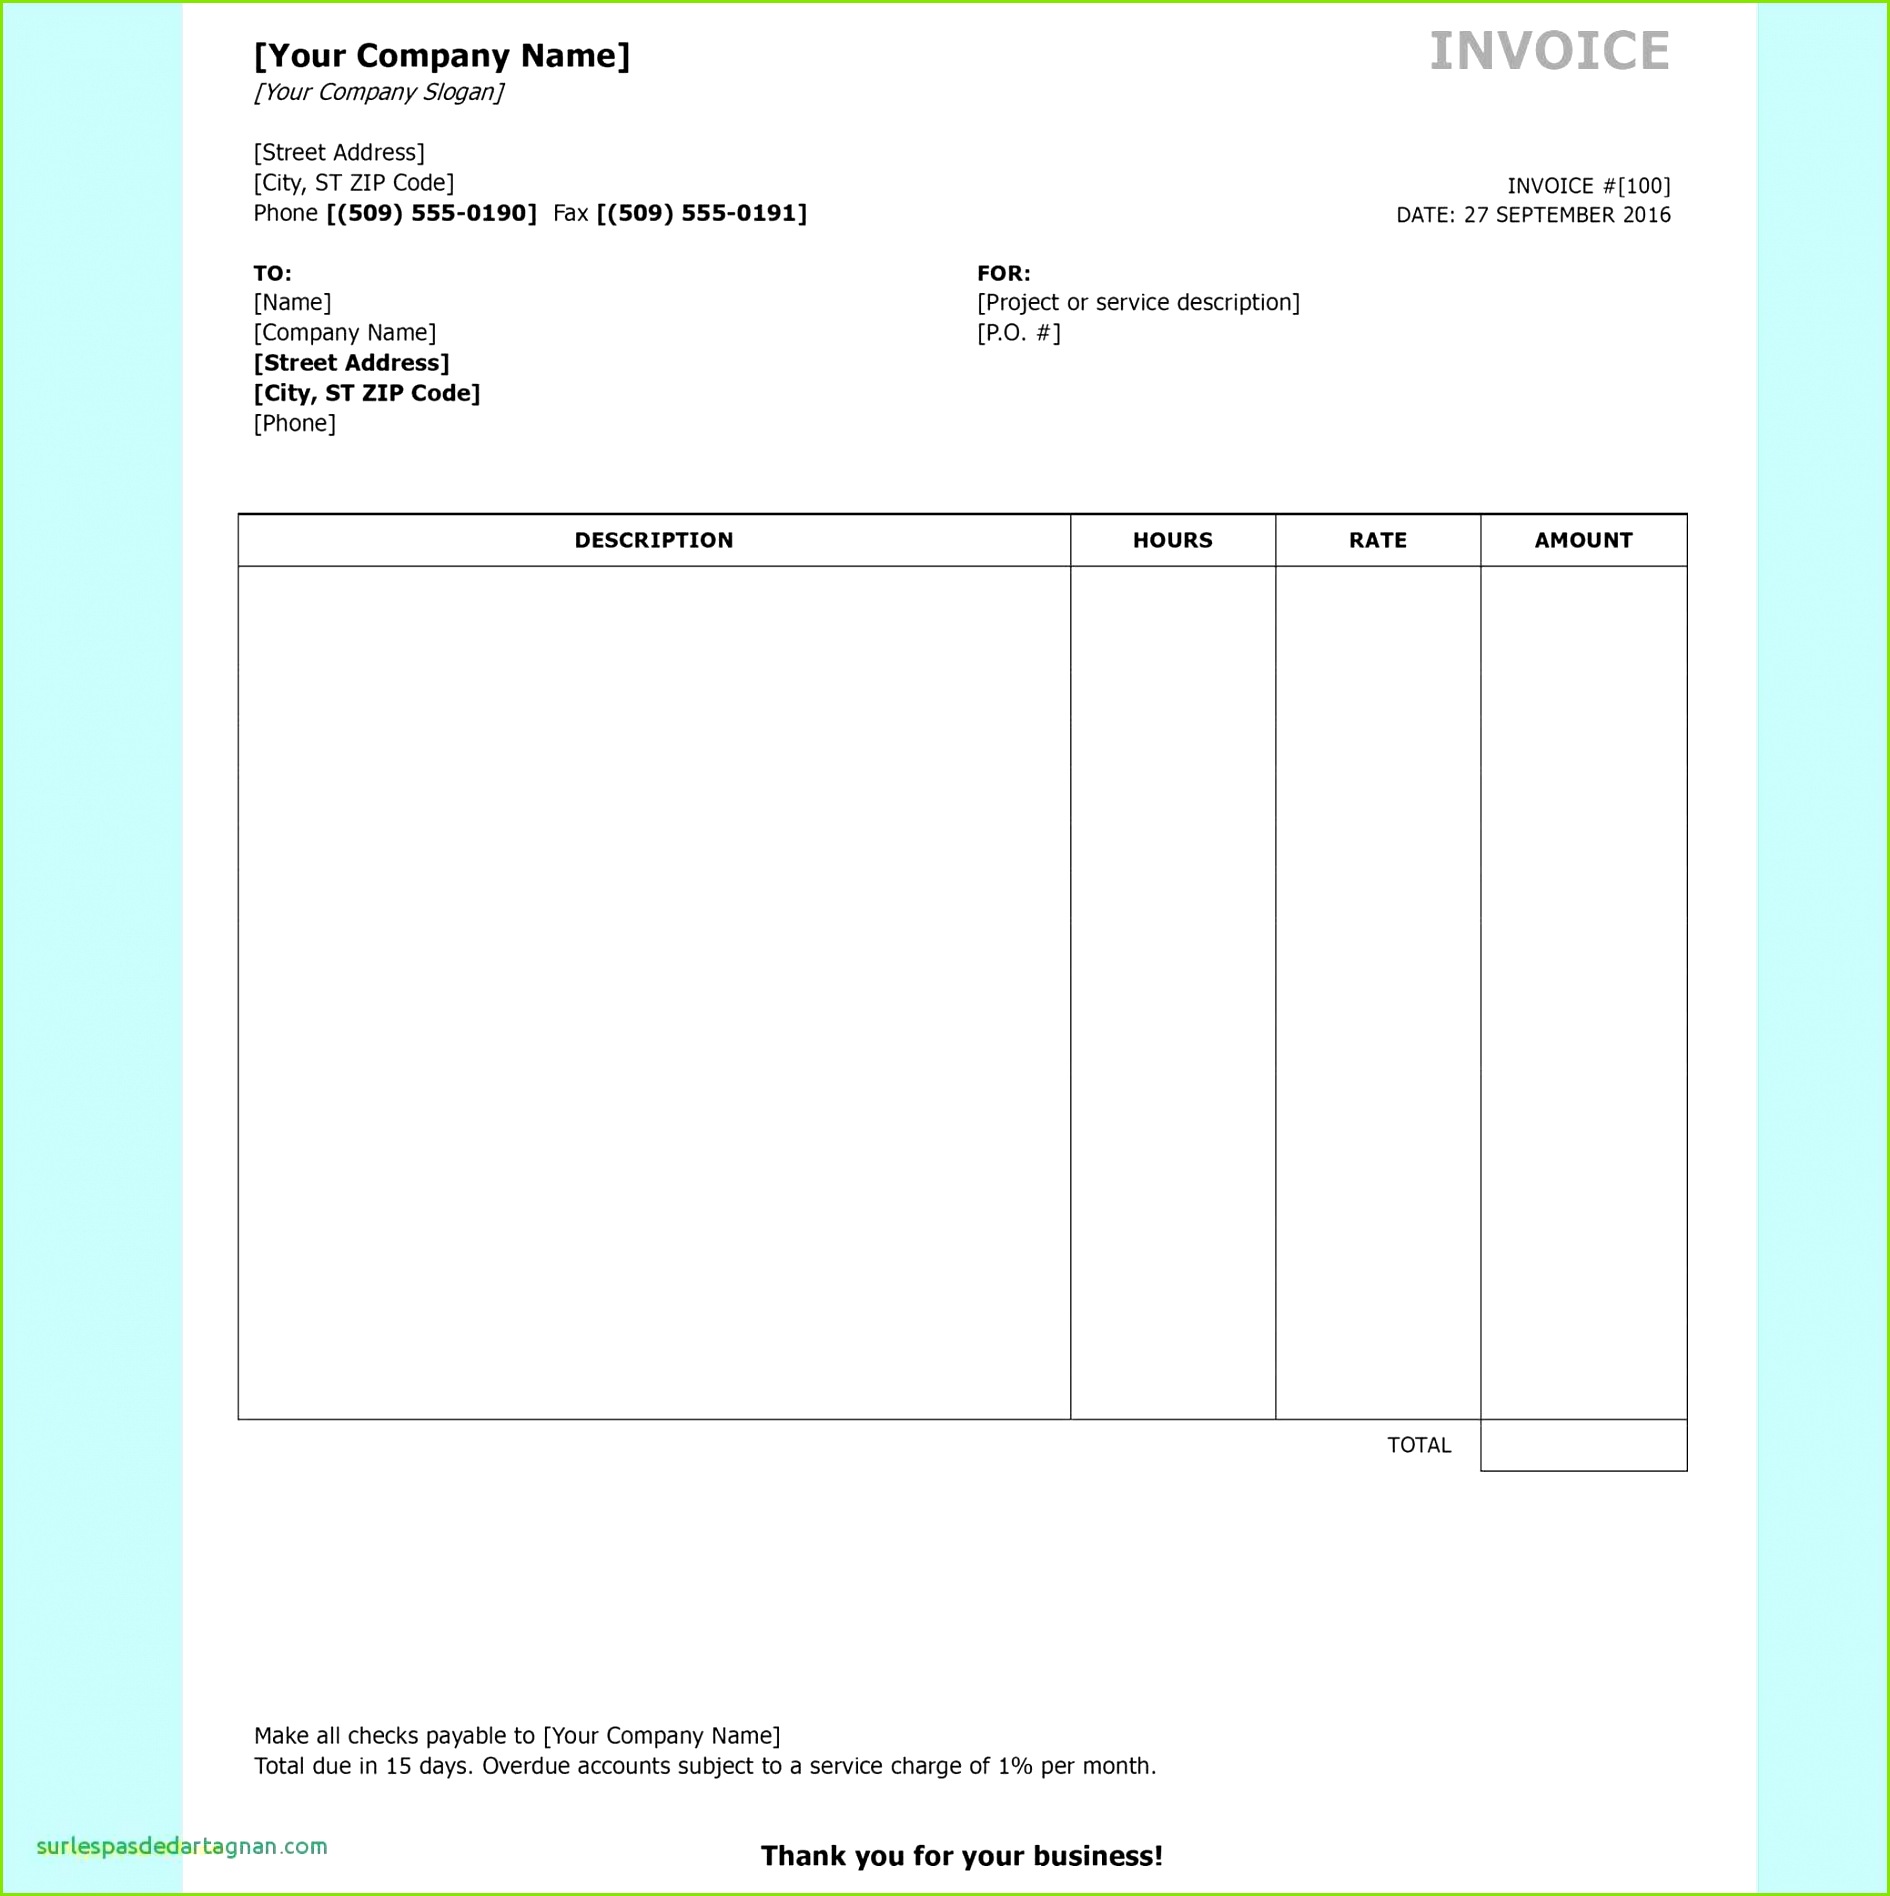 Best Volleyball Template Elegant Invoice Word Template Unique Ivoice Template 0d Archives Free Resume Image Simple